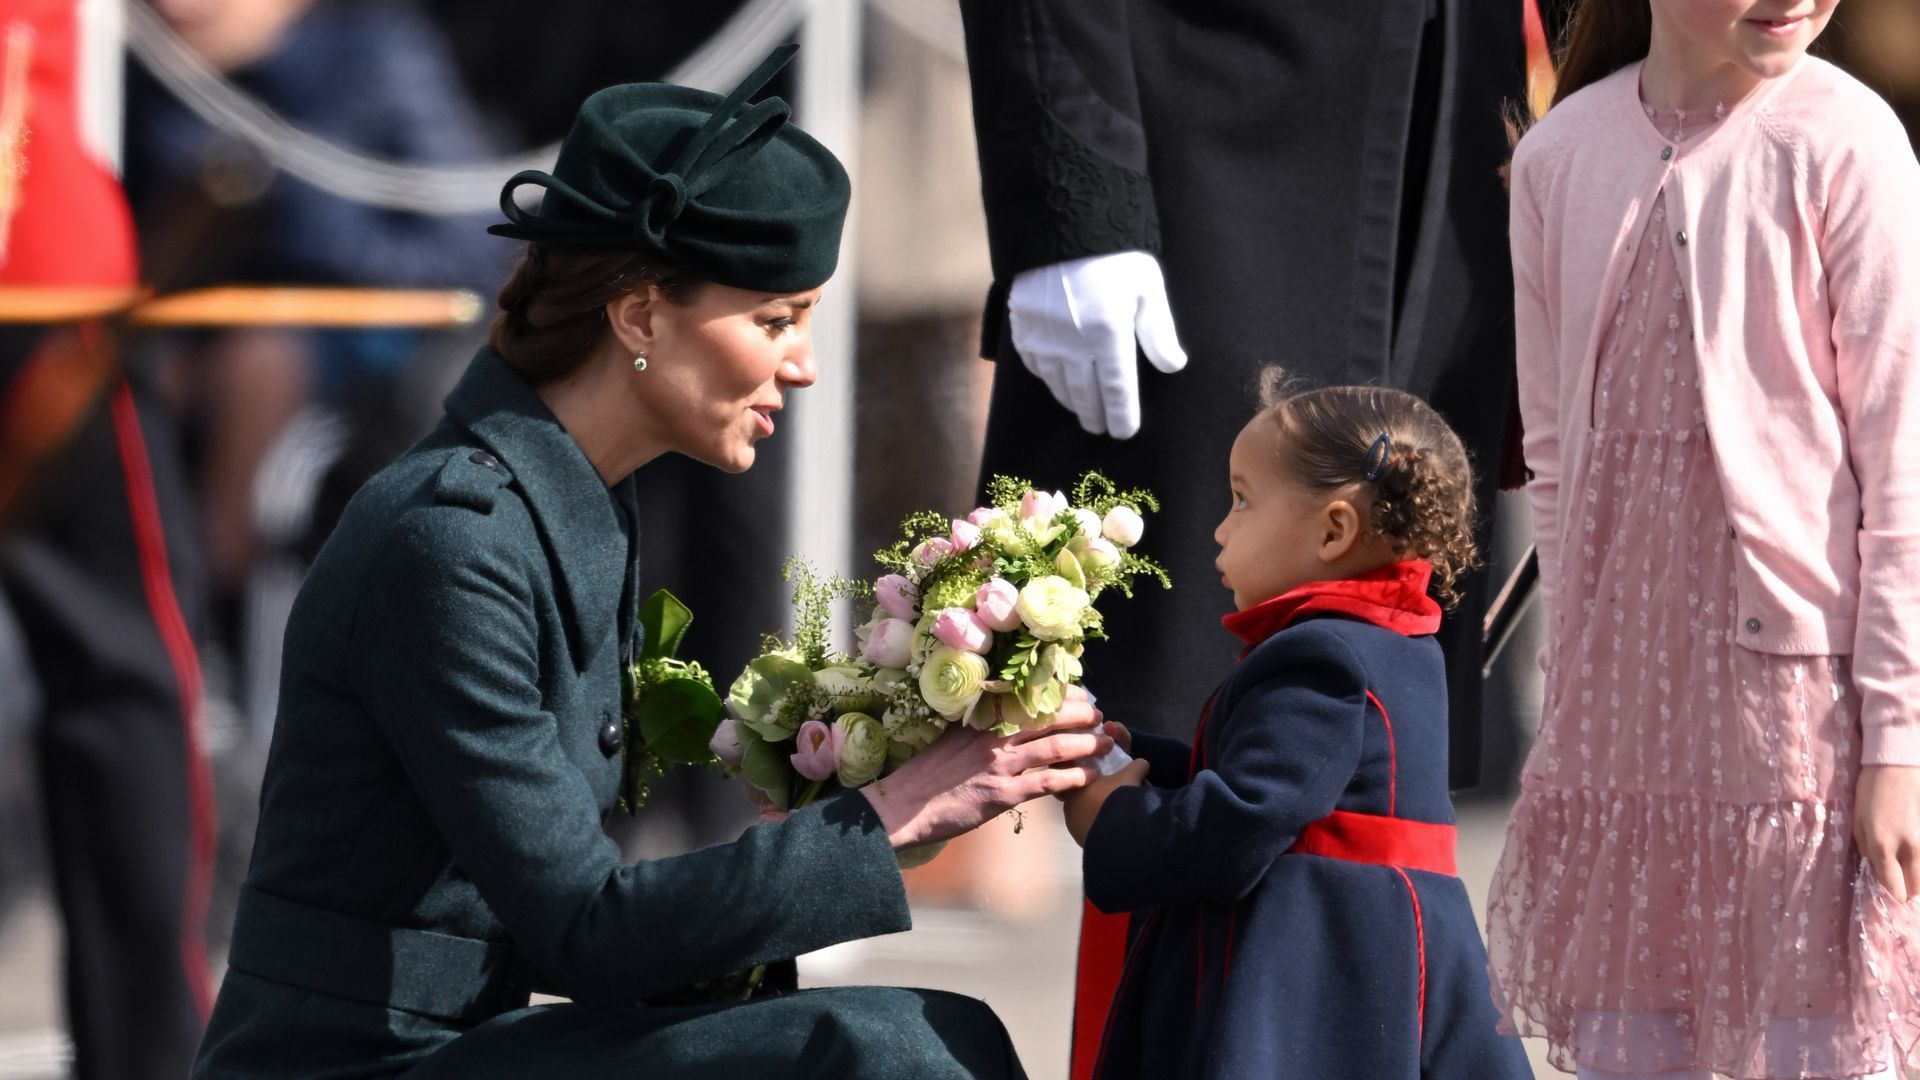 Kate Middleton, the Duchess of Cambridge, is attired in a black hat and coat as she receives white flowers from a young girl in a black and red coat.